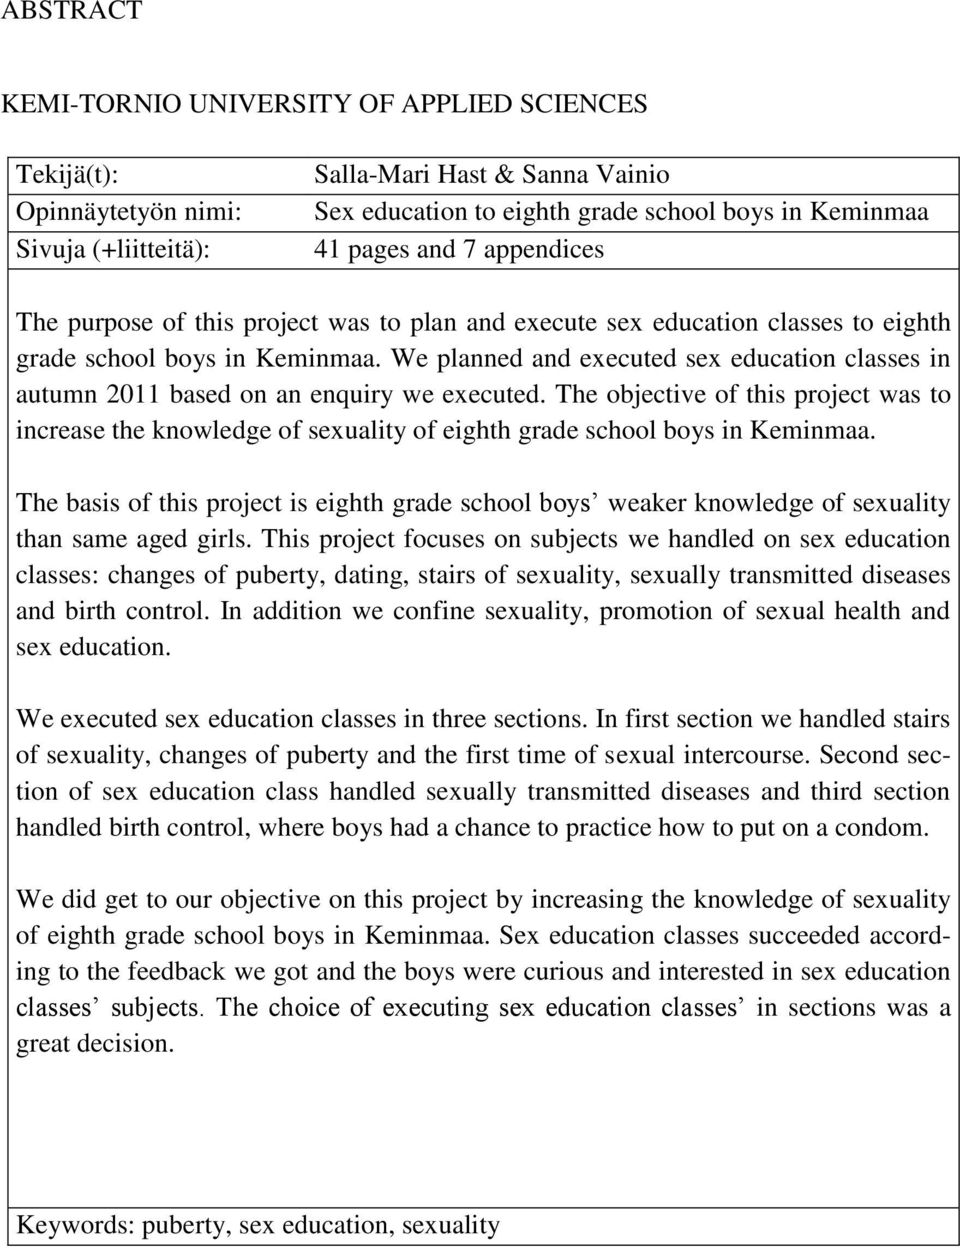 We planned and executed sex education classes in autumn 2011 based on an enquiry we executed.